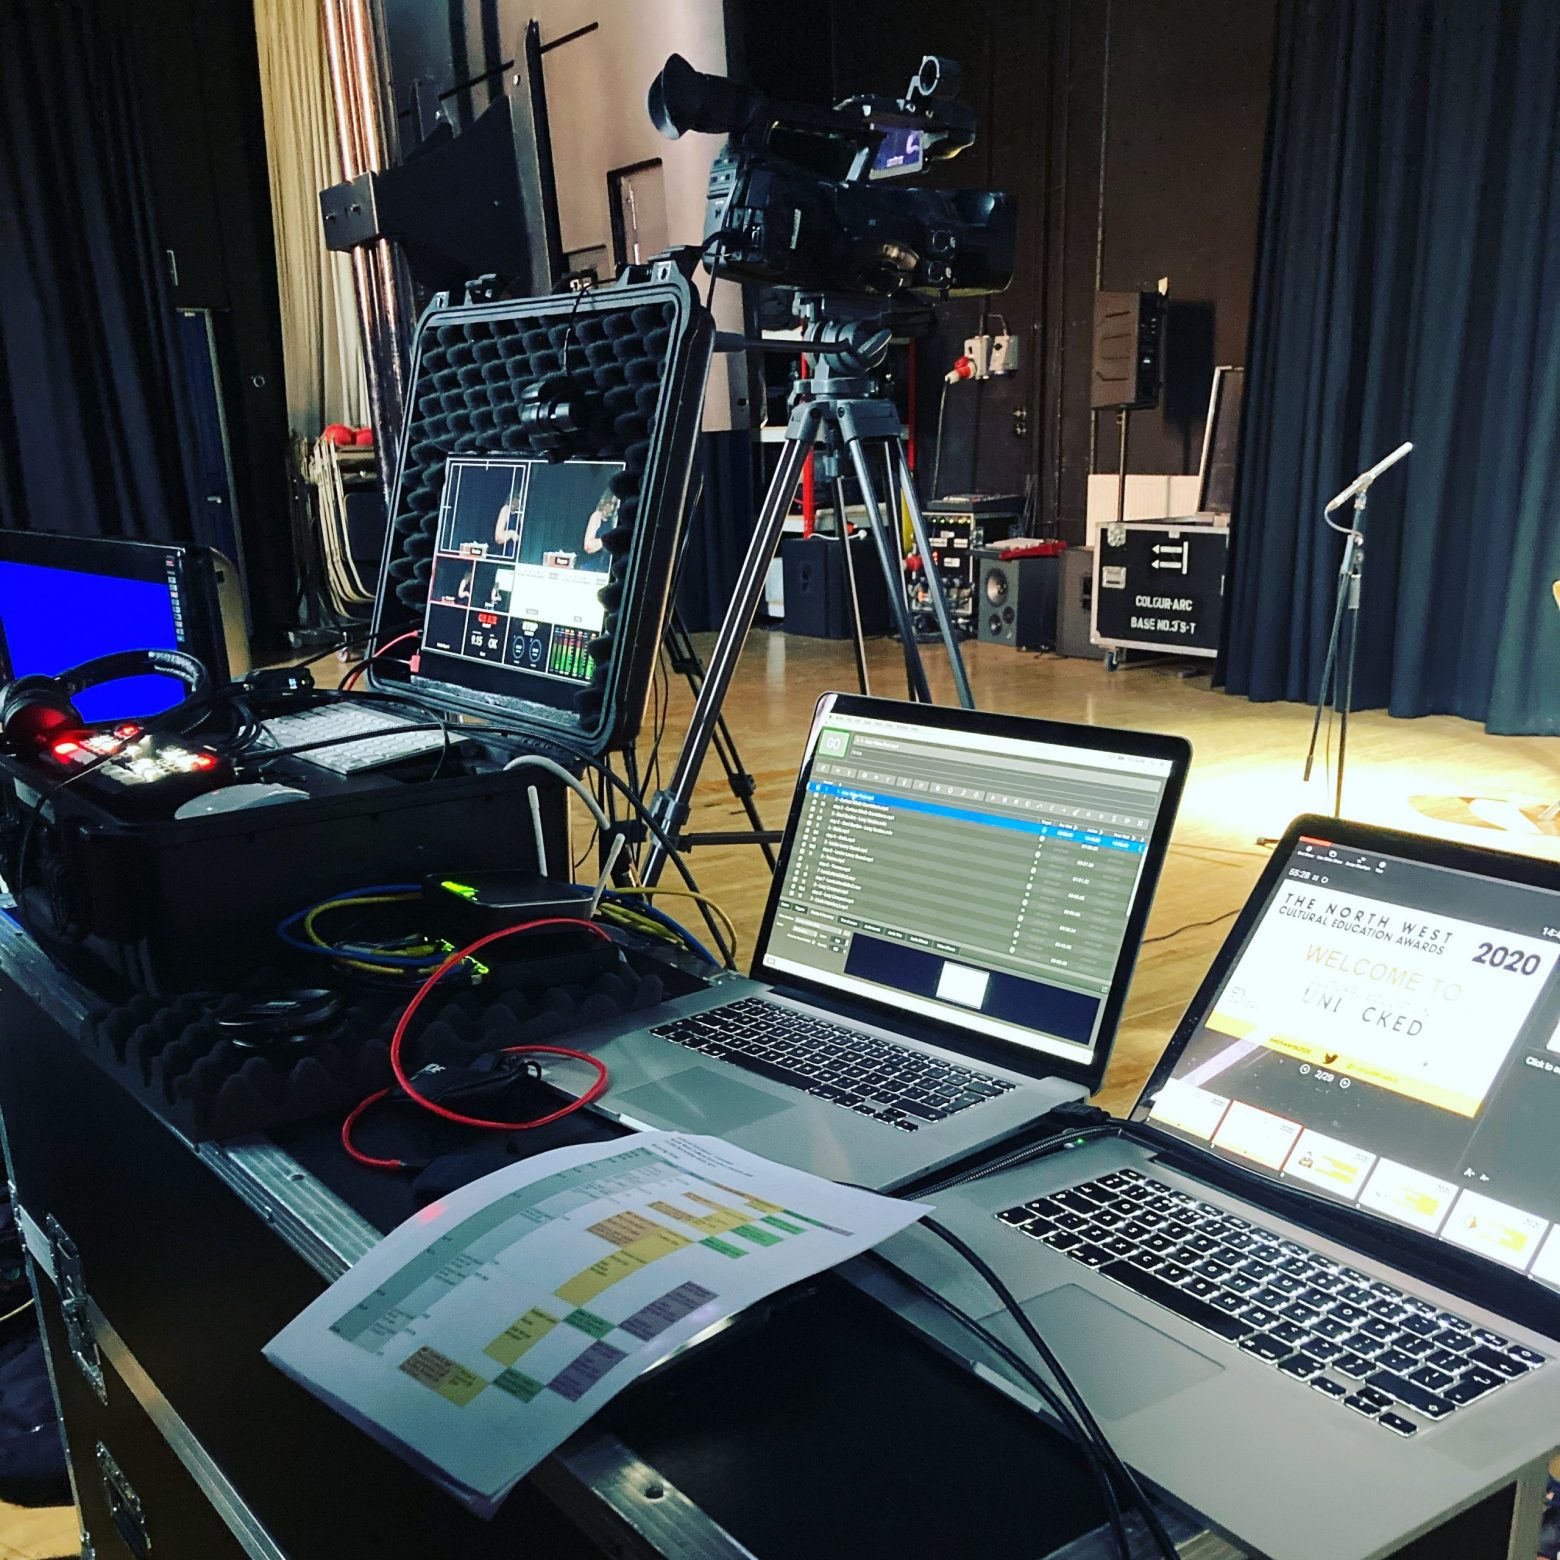 3 laptops, and multiple cameras set up to record a virtual live streamed event